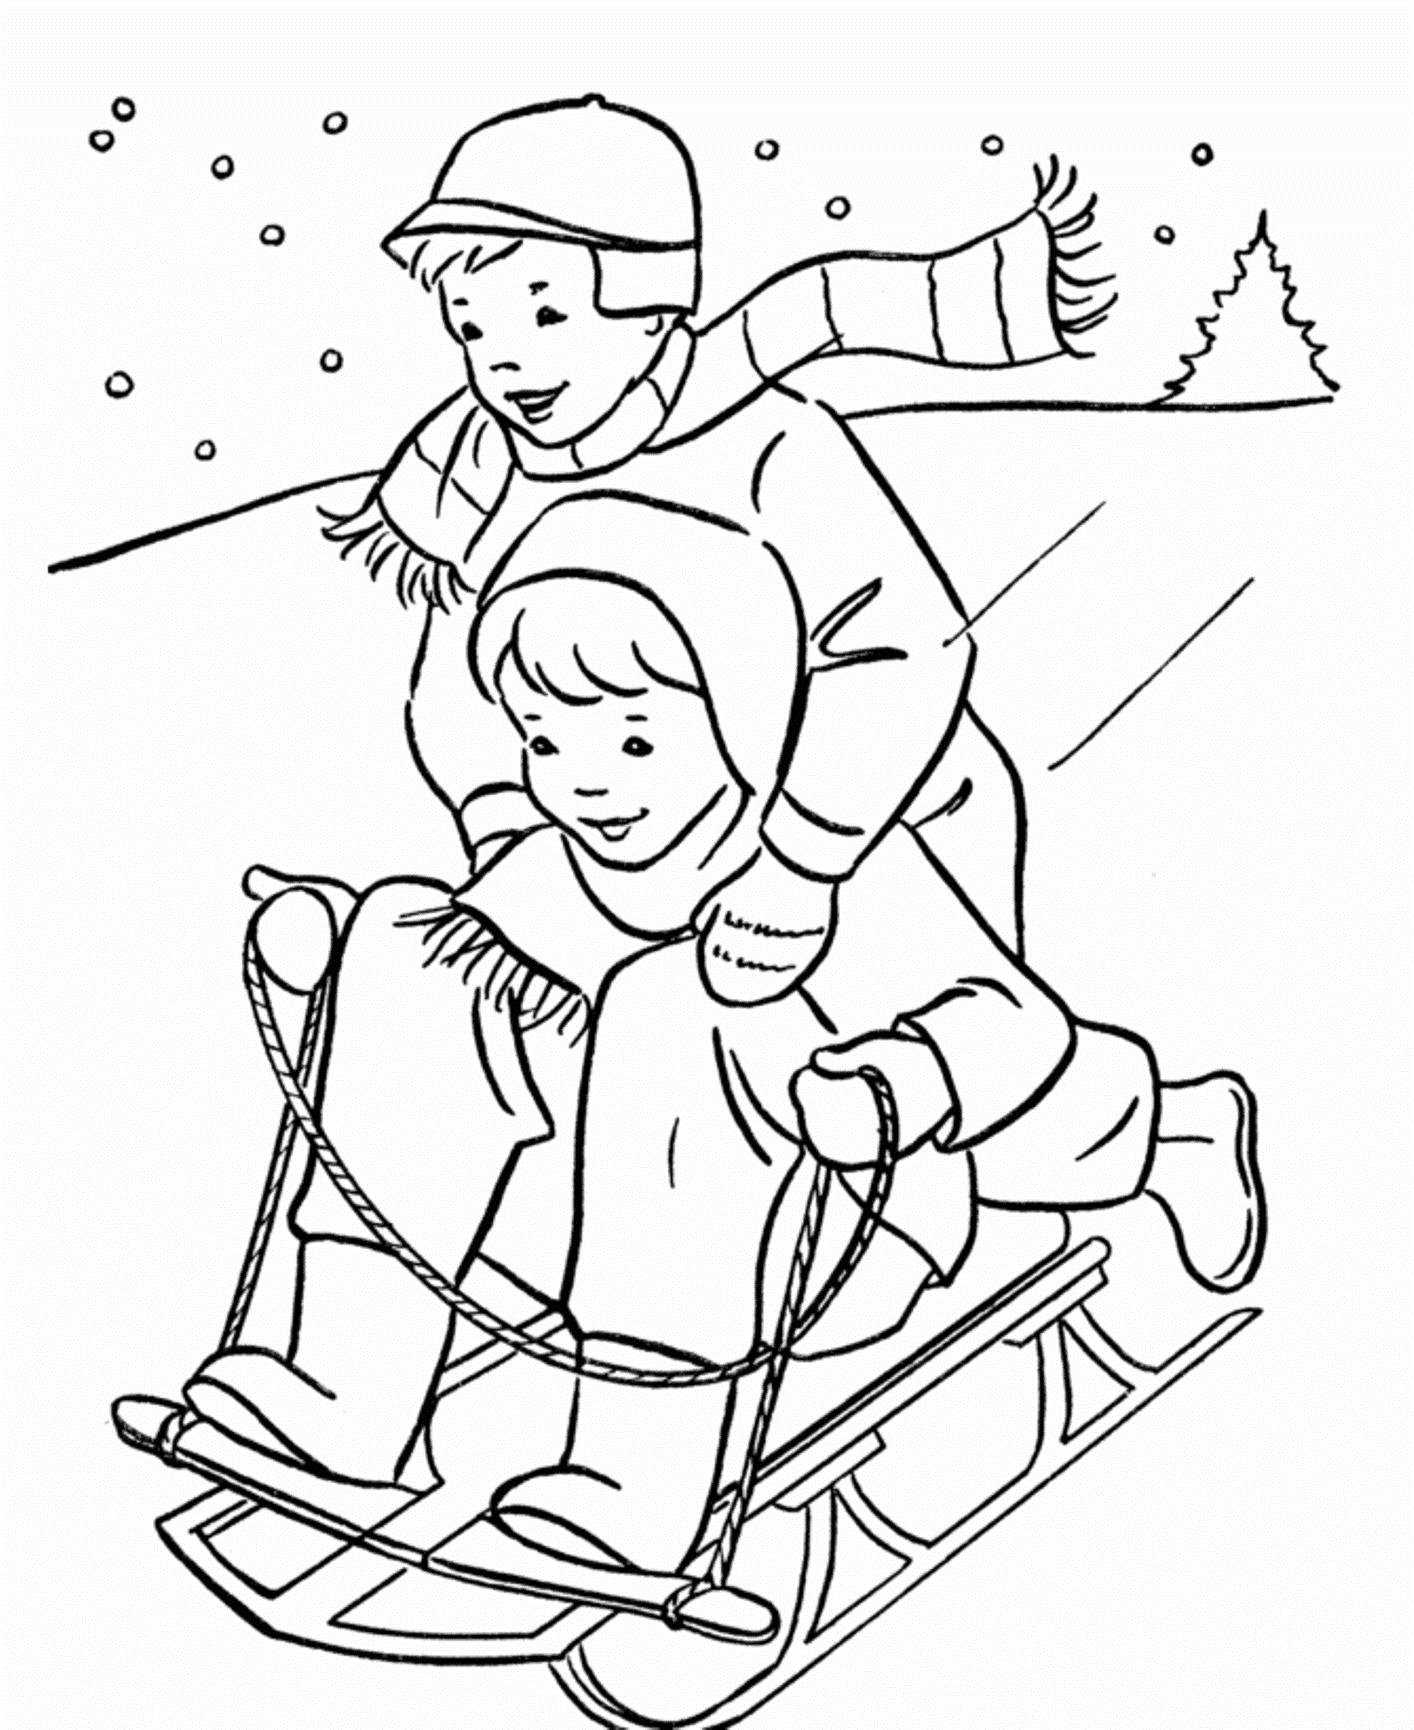 colouring sheets winter free printable winter coloring pages for kids colouring sheets winter 